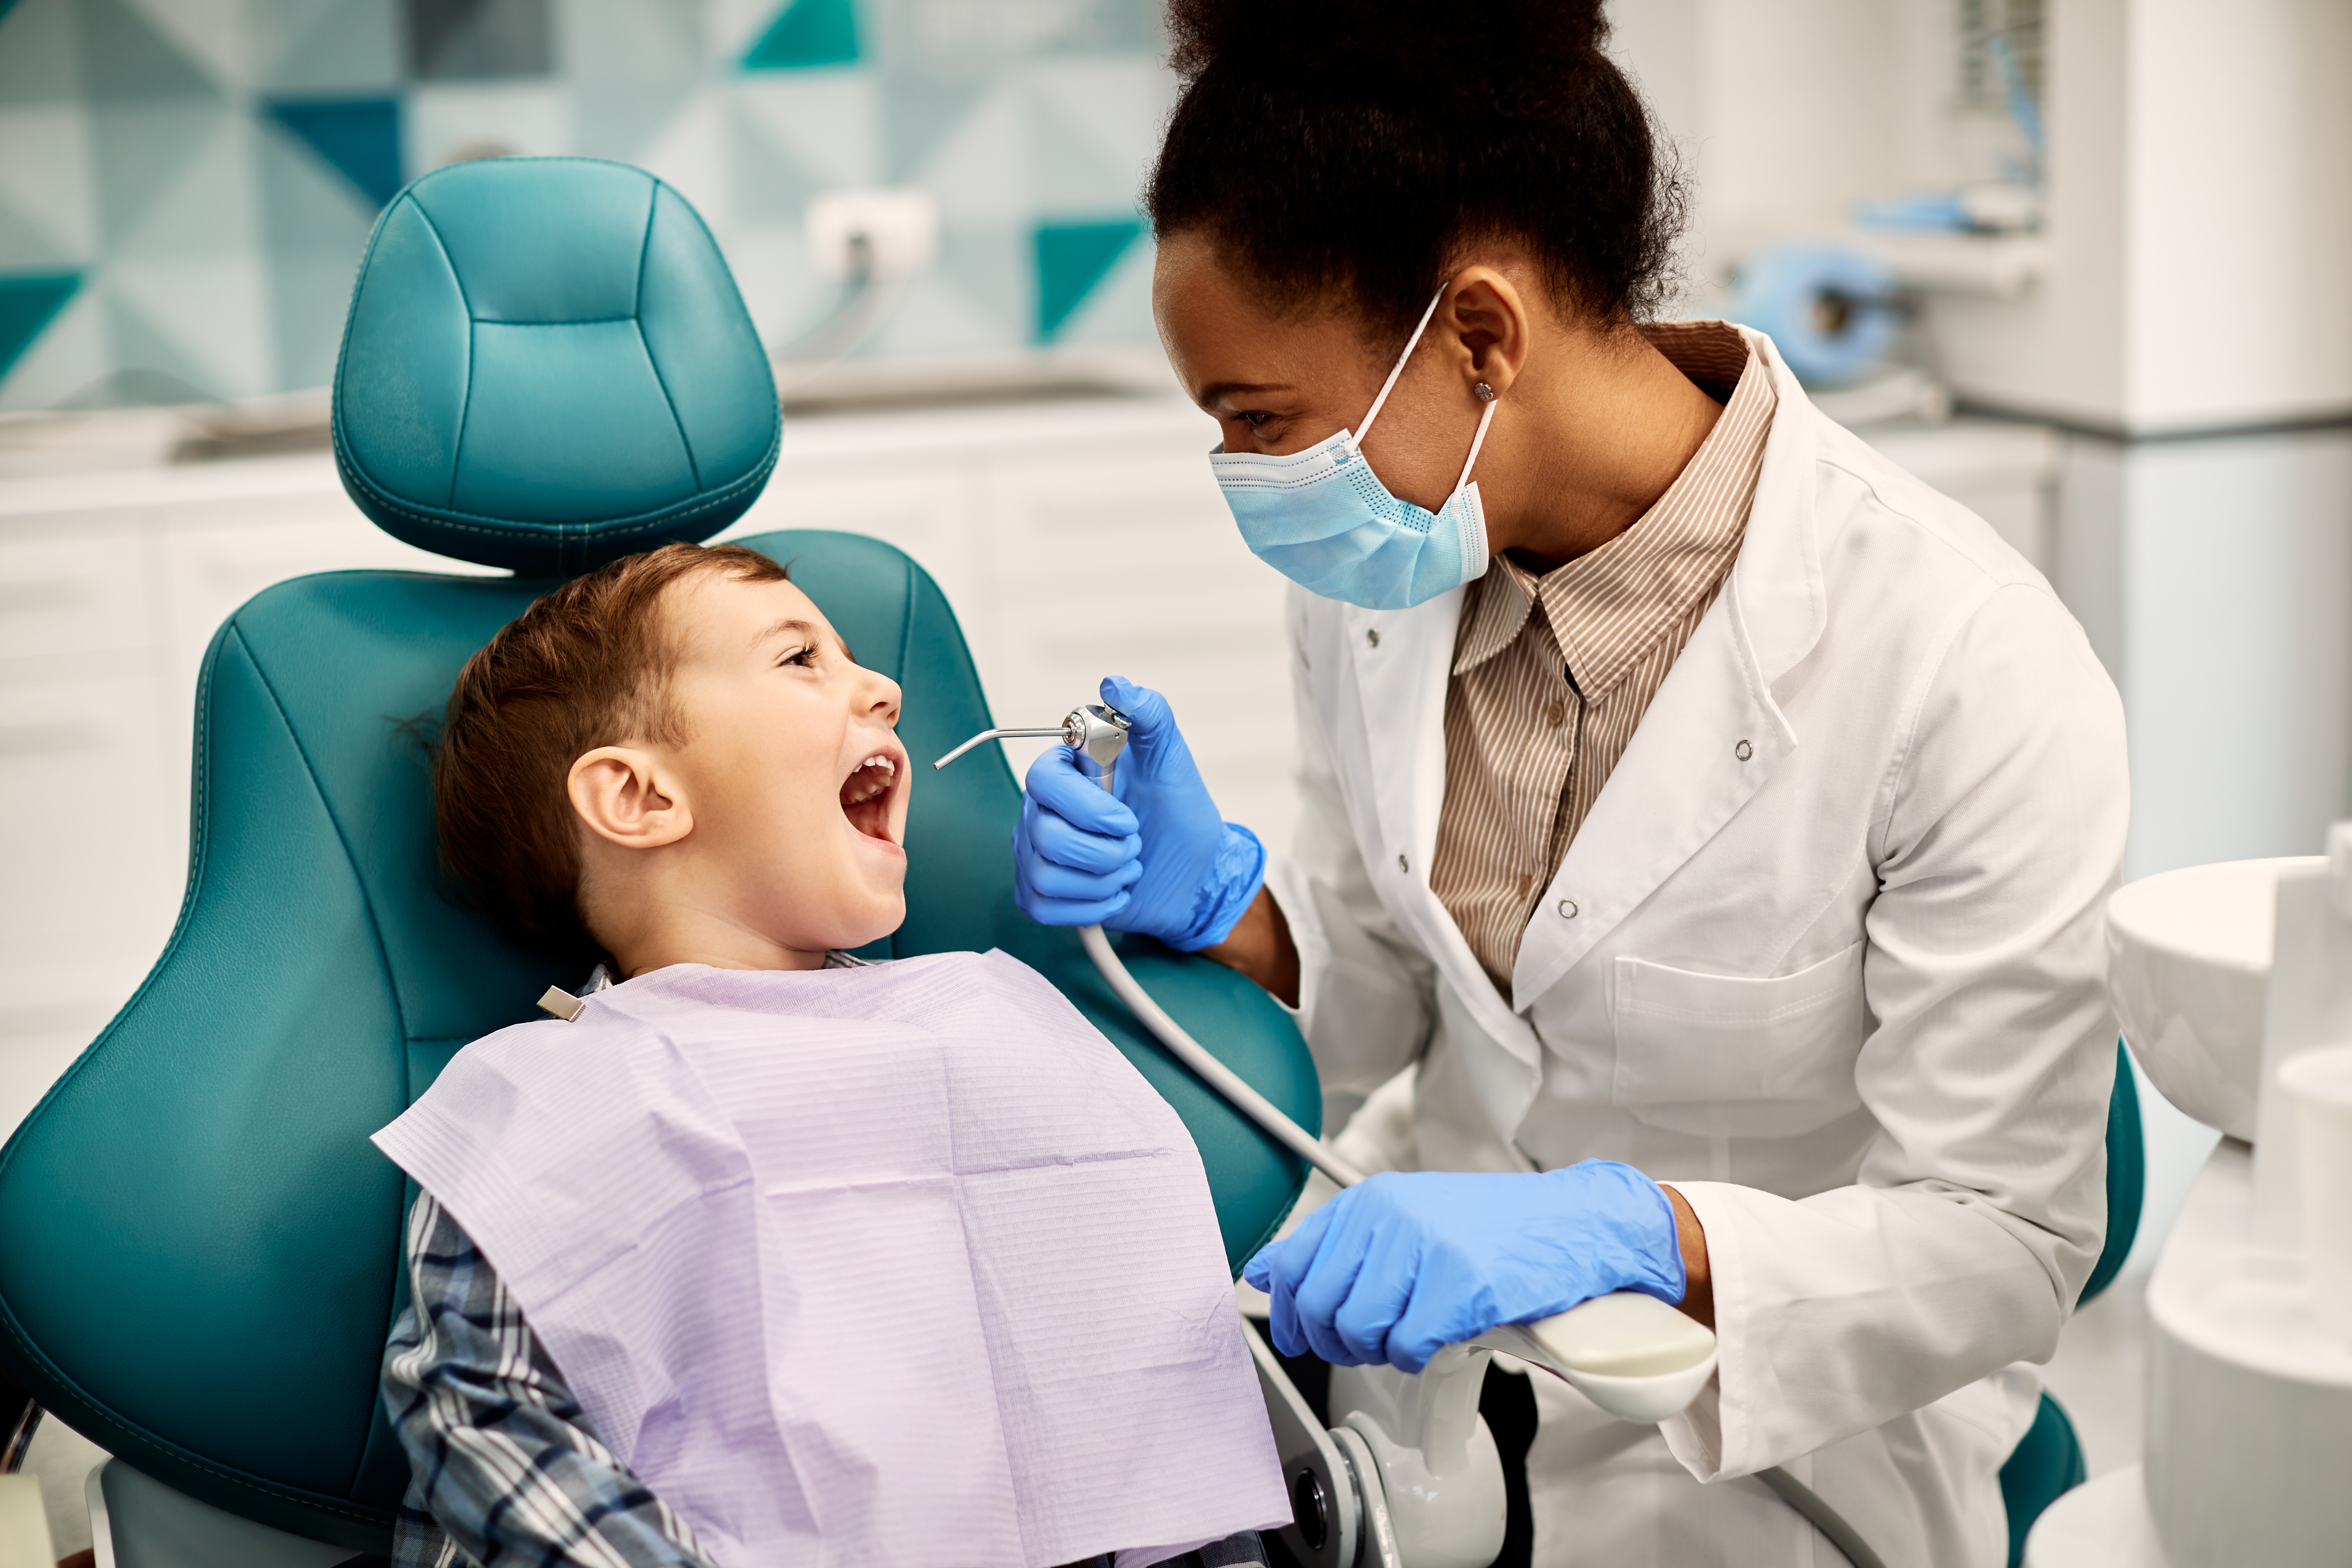 A small boy smiles happily at his dentist who is holding a water spray tool.